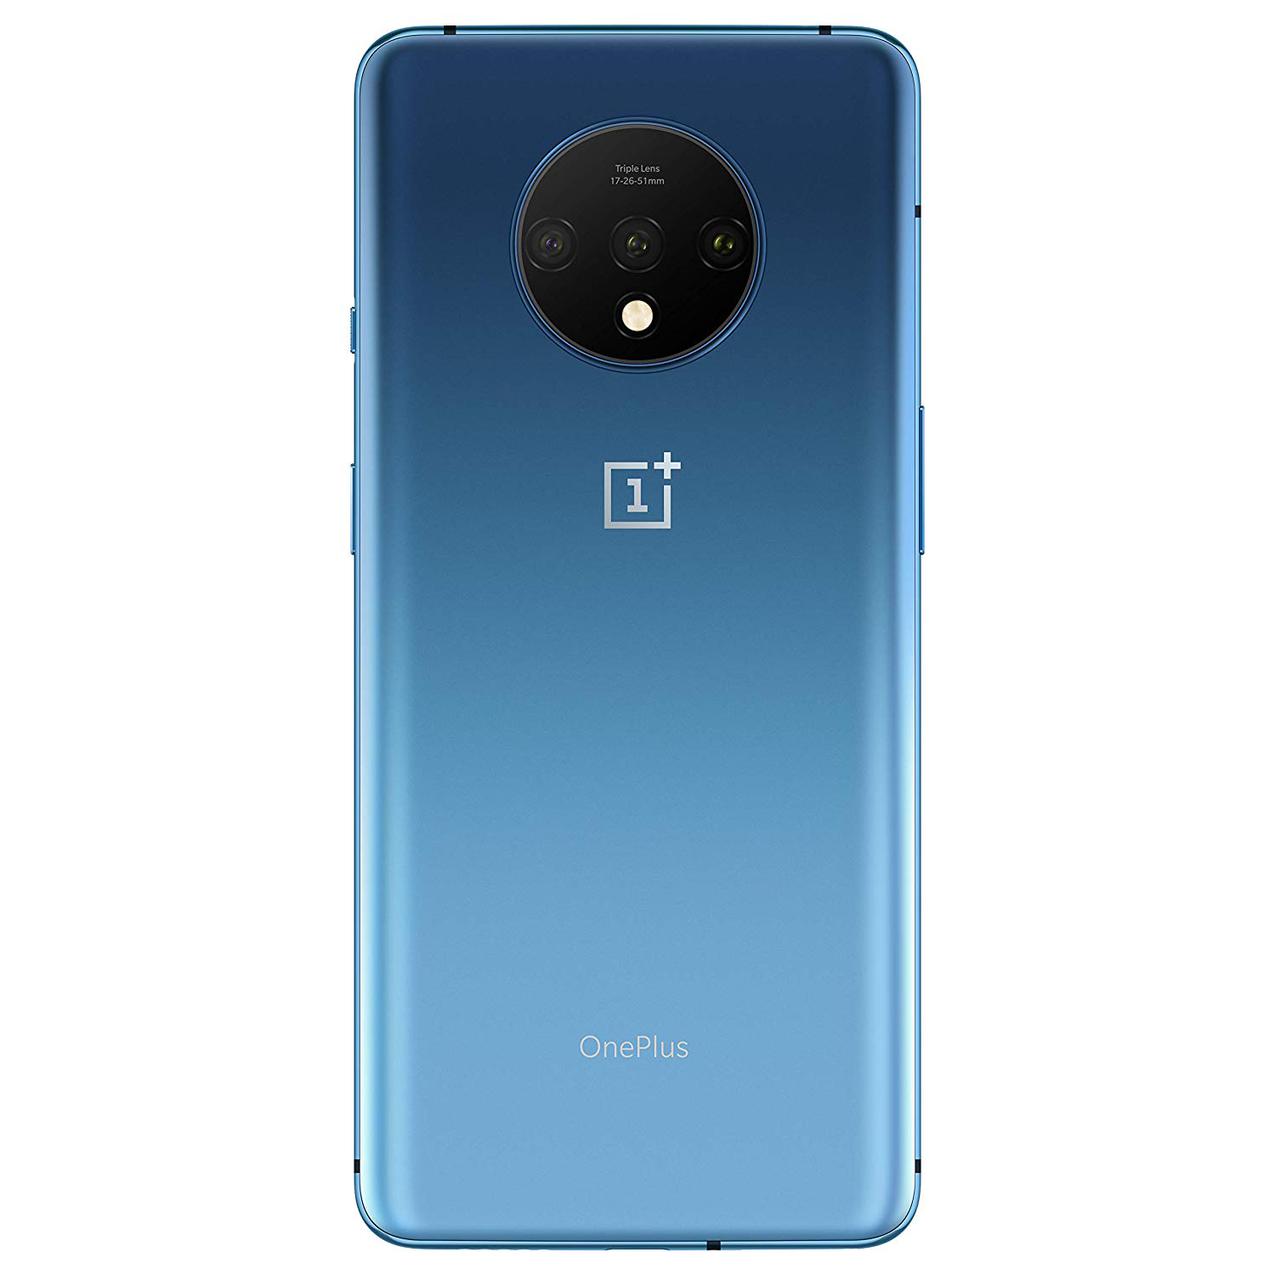 Android Open Source Illusion Project ROM in OnePlus 7T